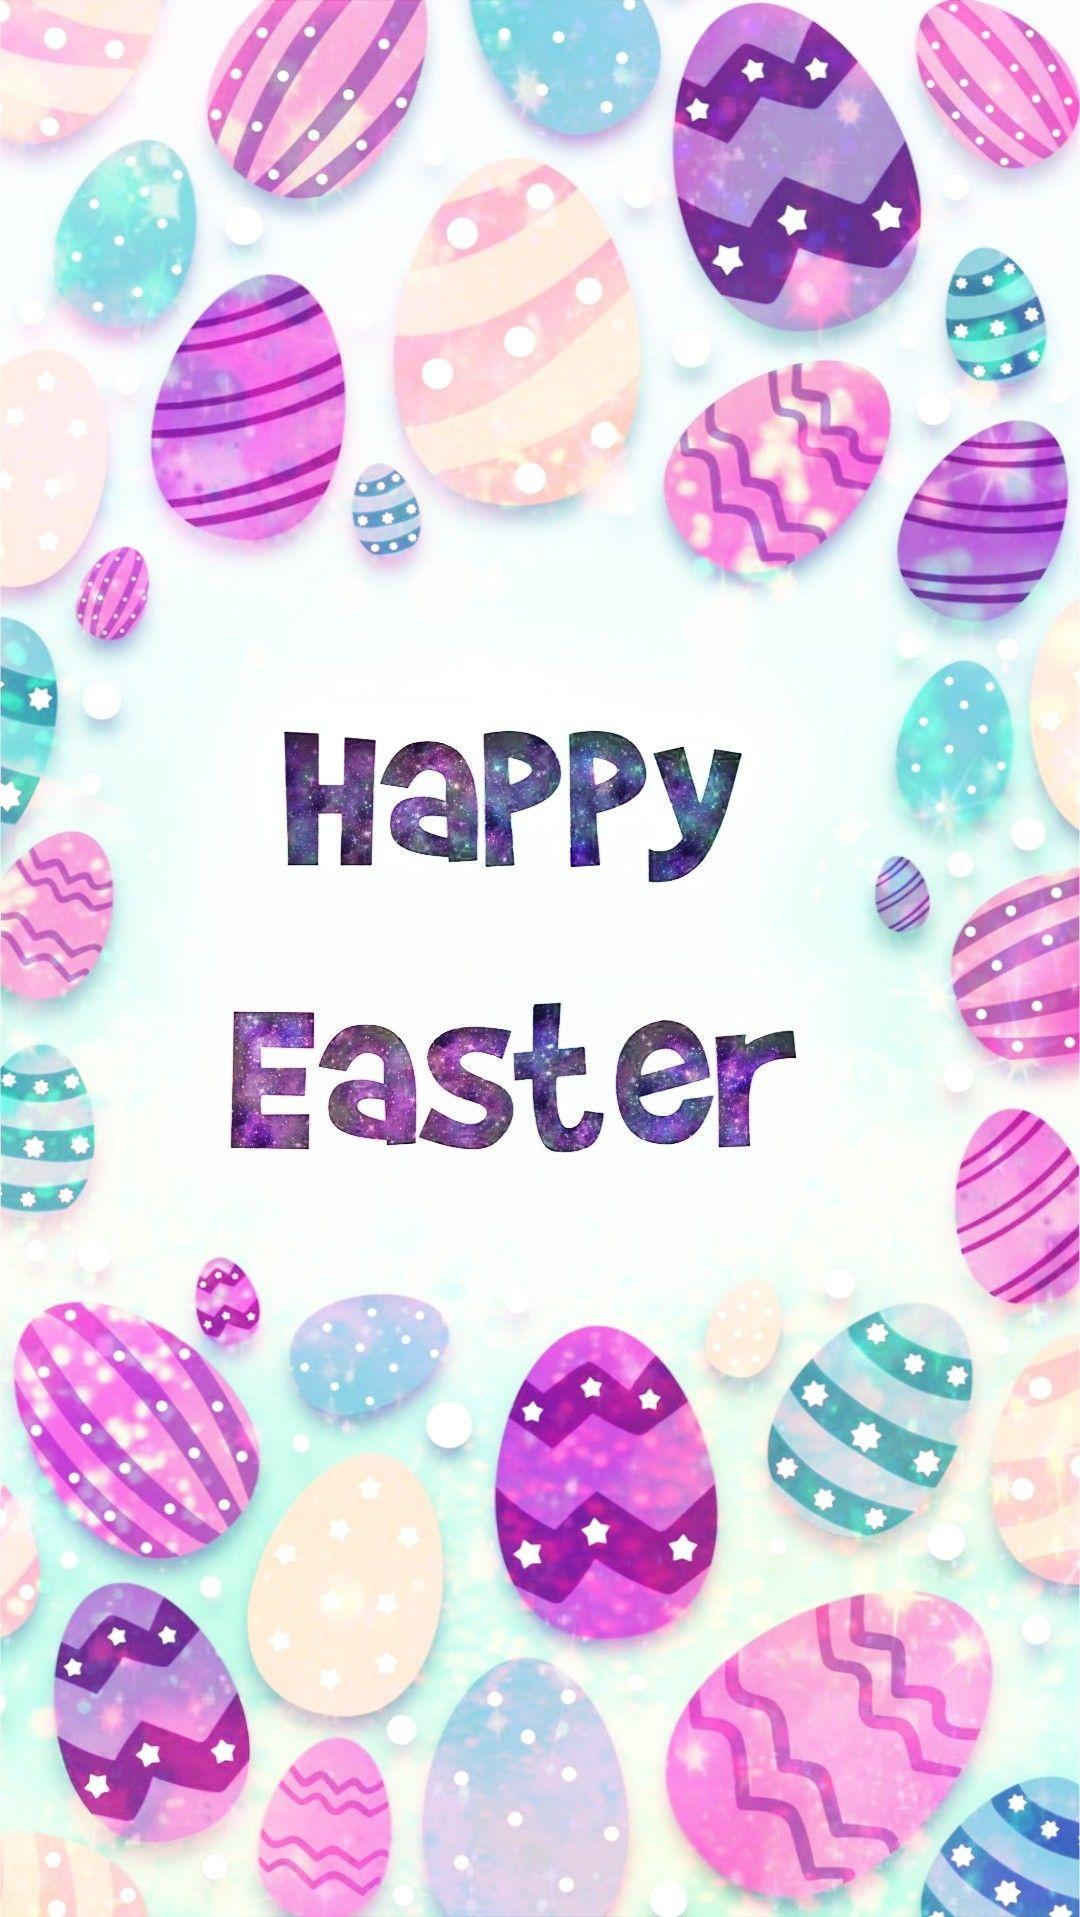 Glittery Happy Easter, made by me #patterns #purple #glitter